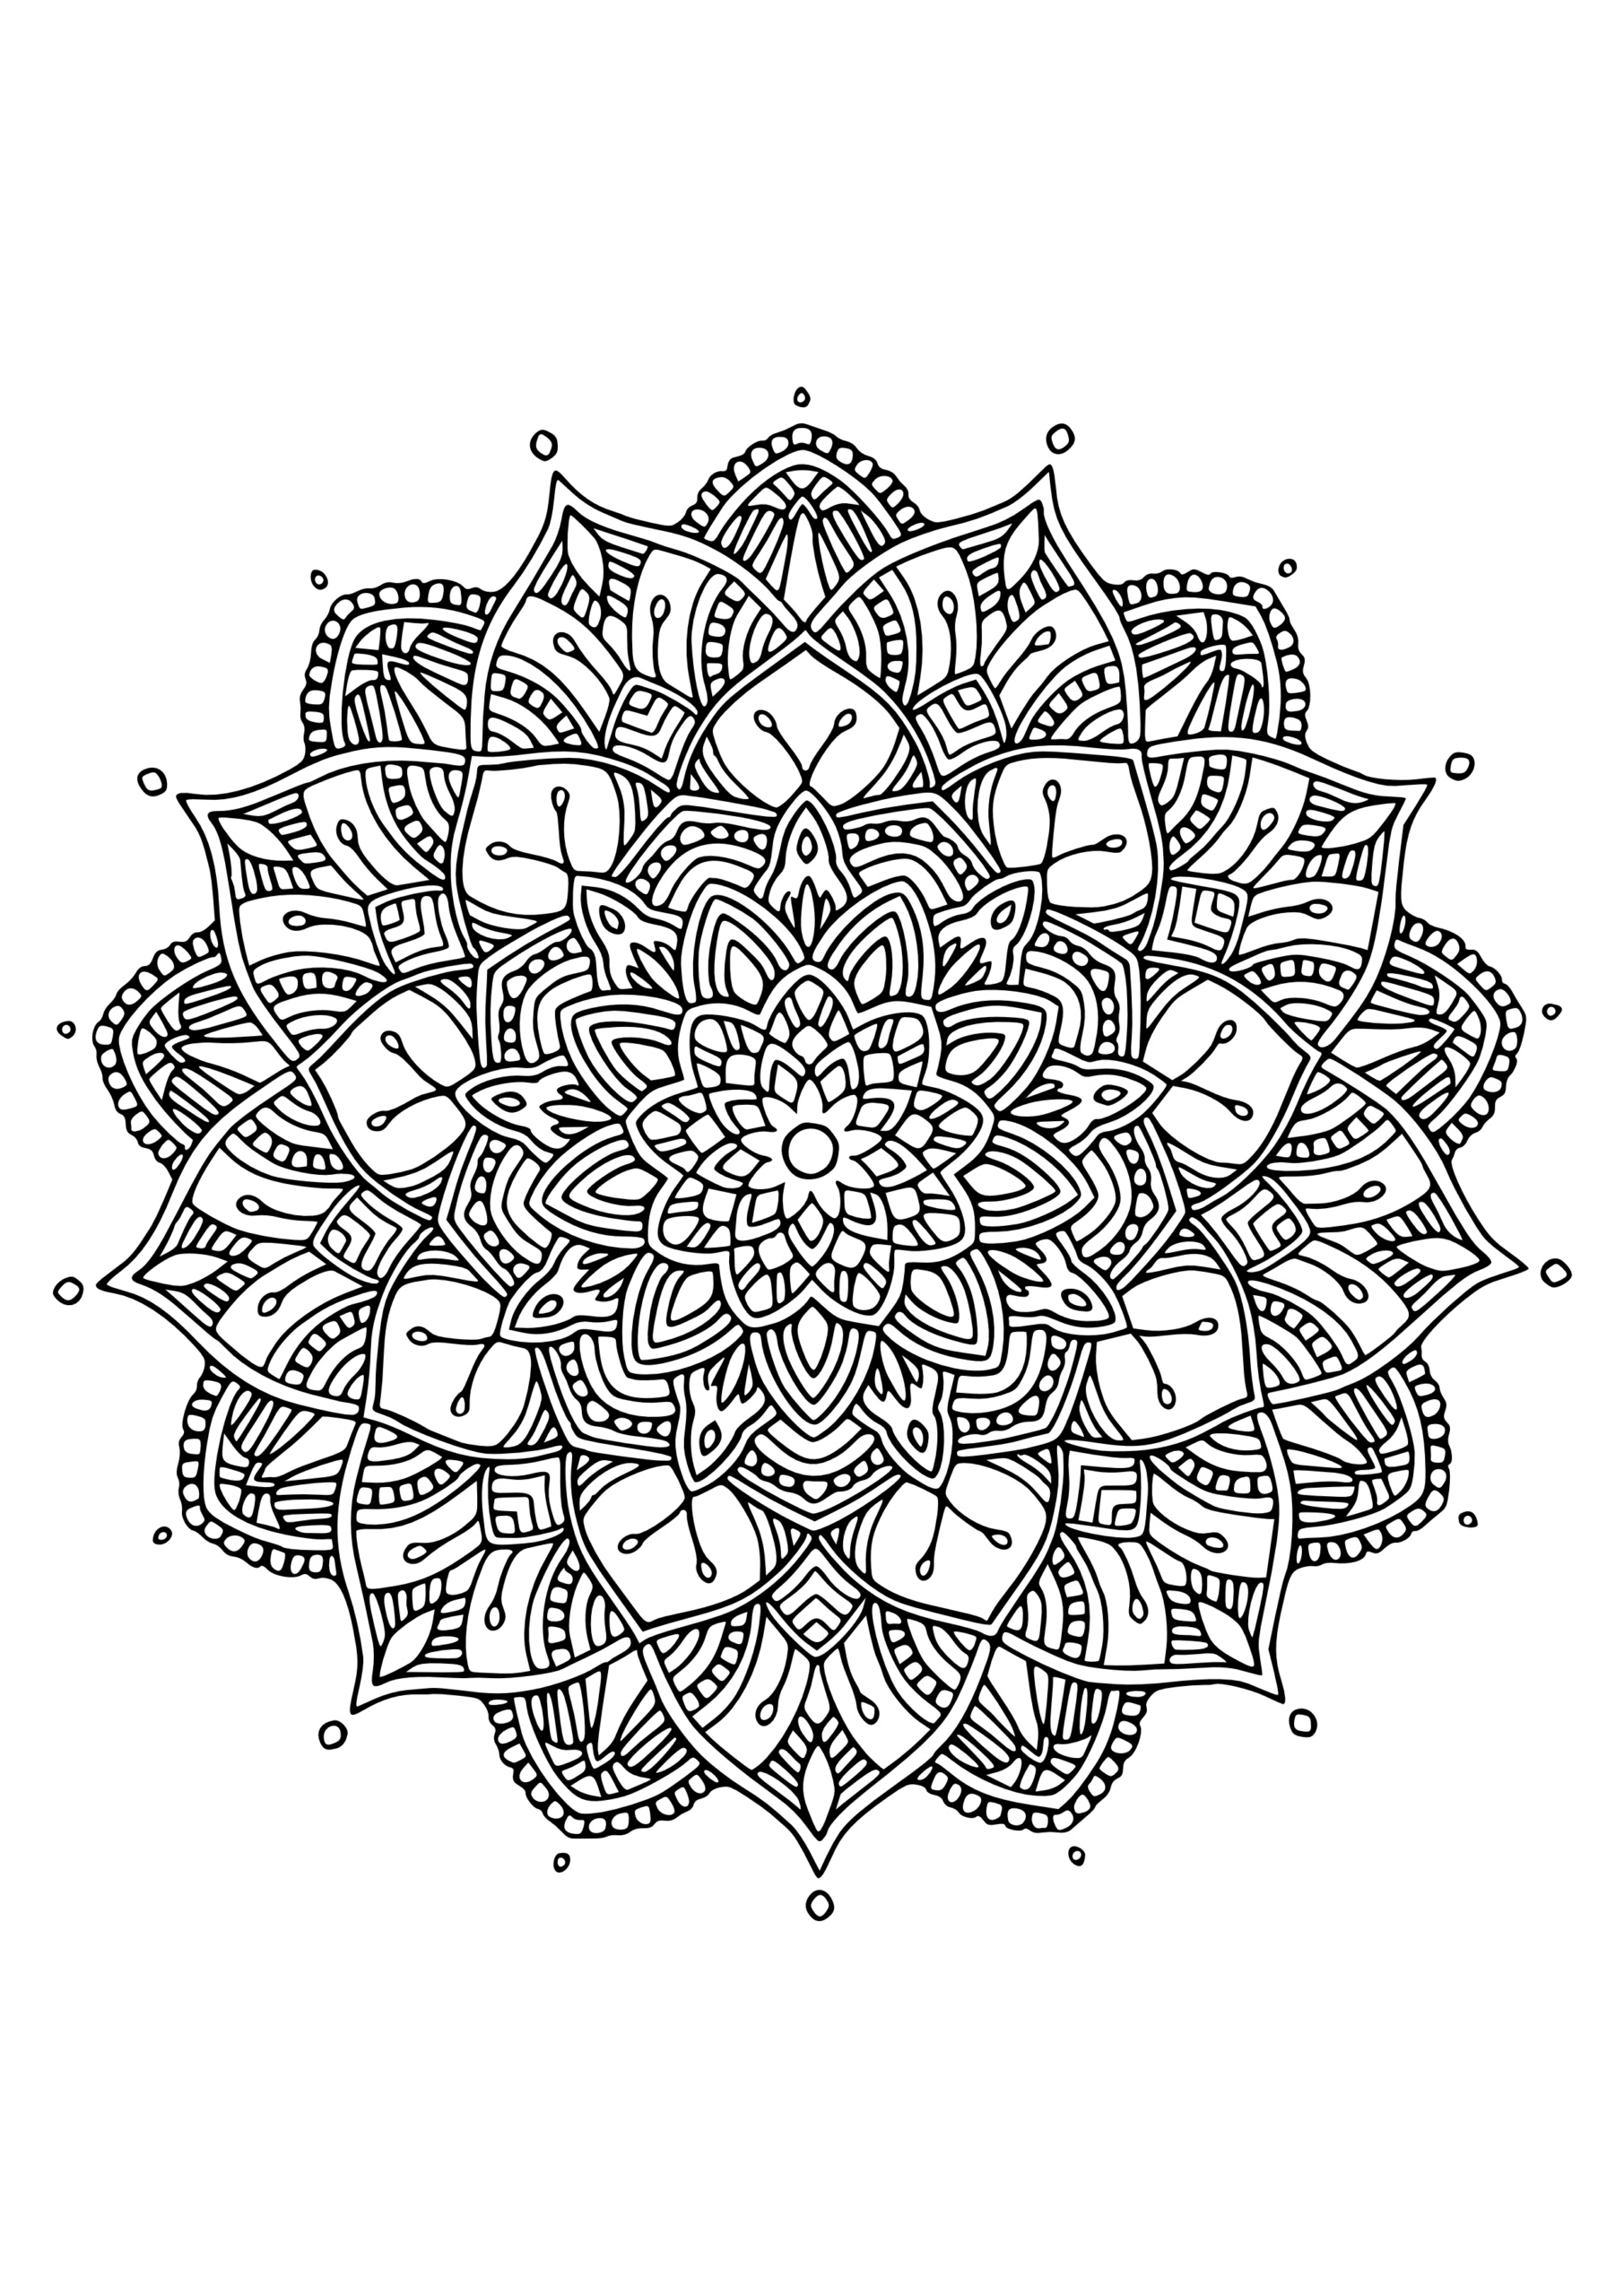 Free Printable Mandala Coloring Pages For Adults